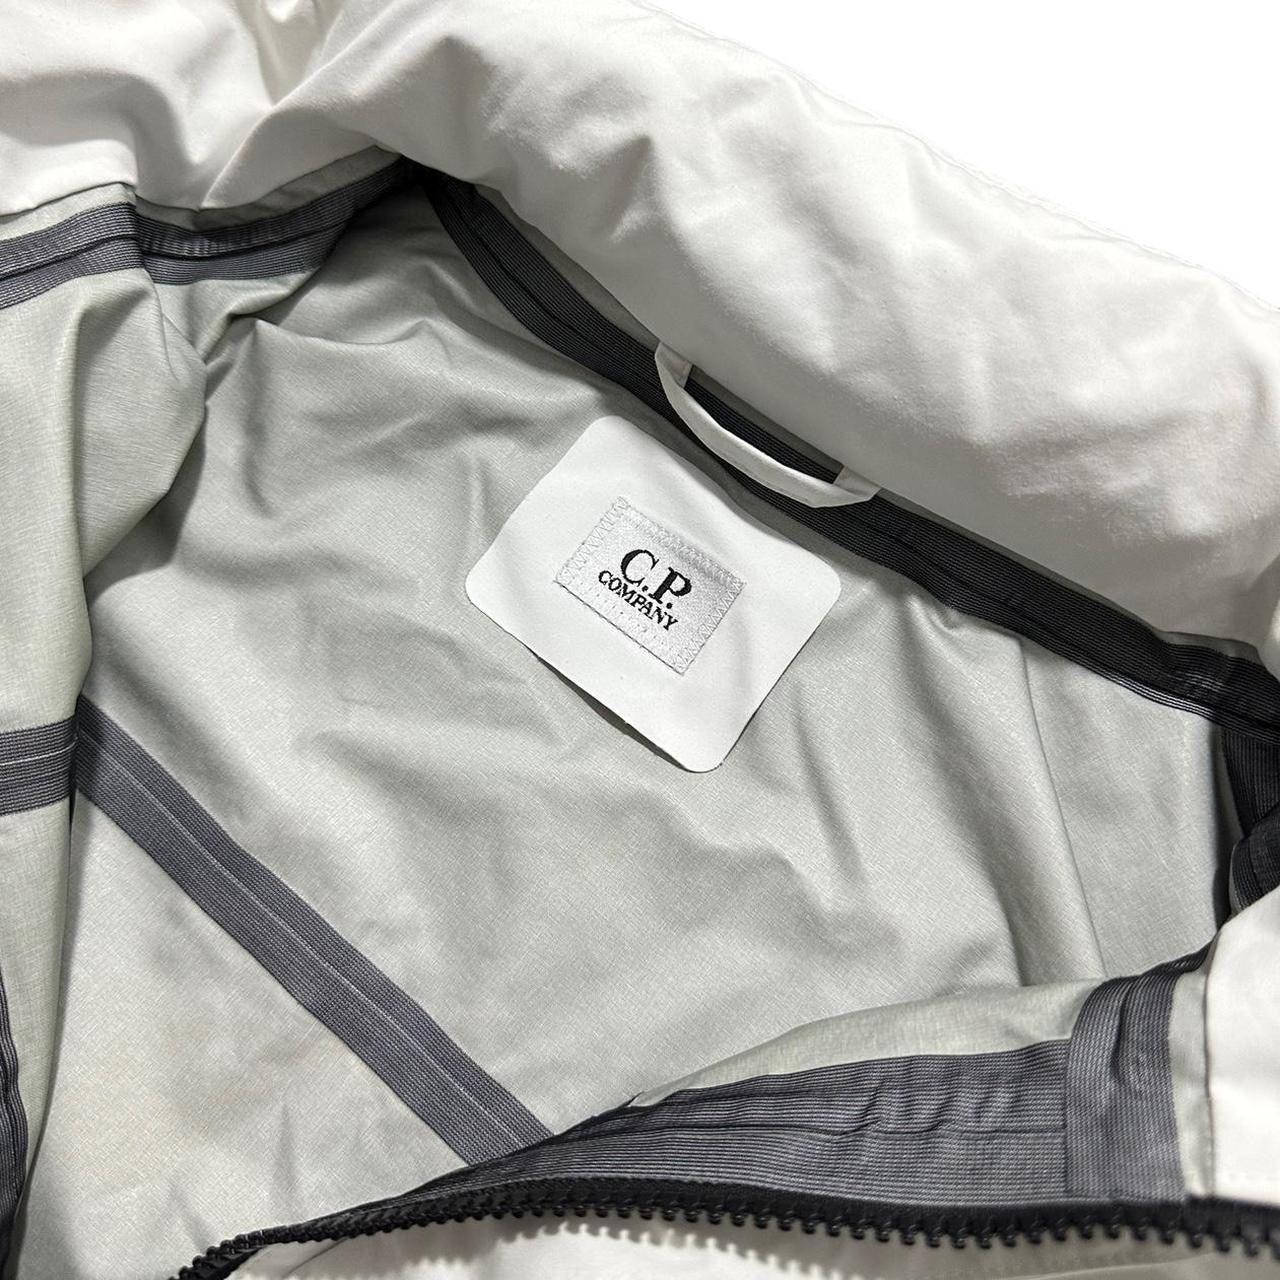 CP Company T-Mack Jacket - Known Source